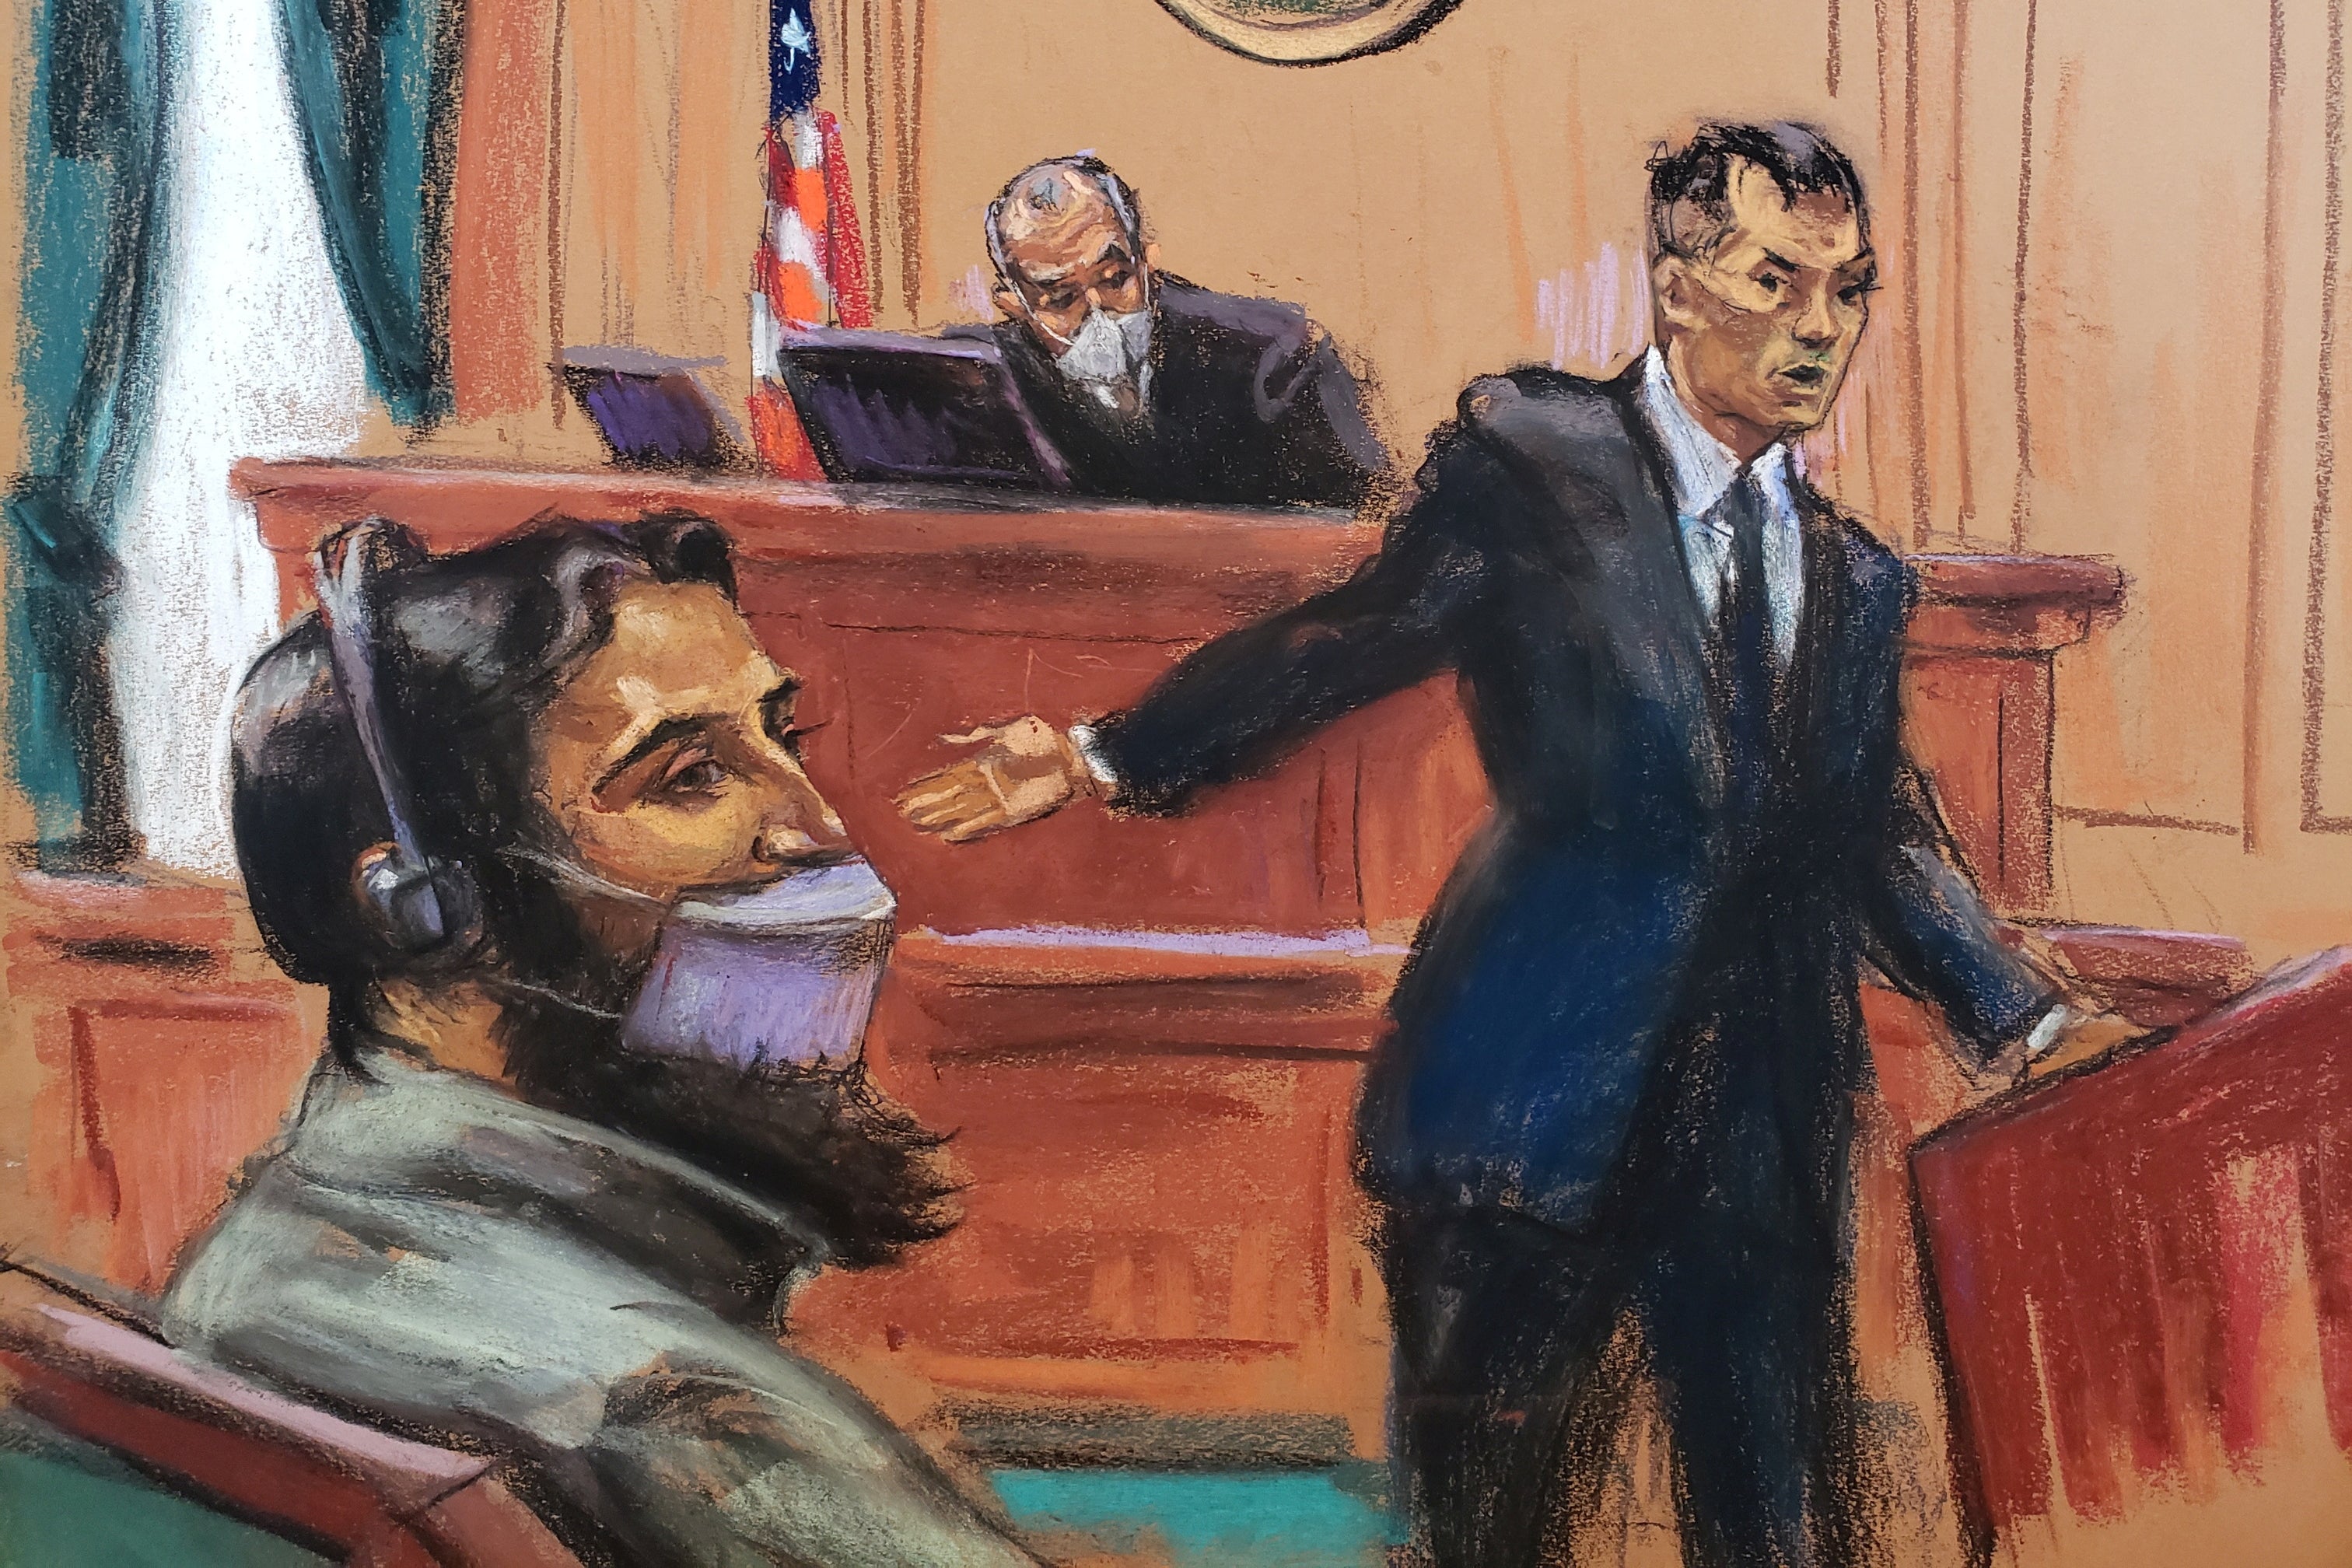 Courtroom sketch shows Saipov seated, wearing translation headphones and a mask, as Li stands and angrily speaks, gesturing toward him, and the judge seated in the background listens